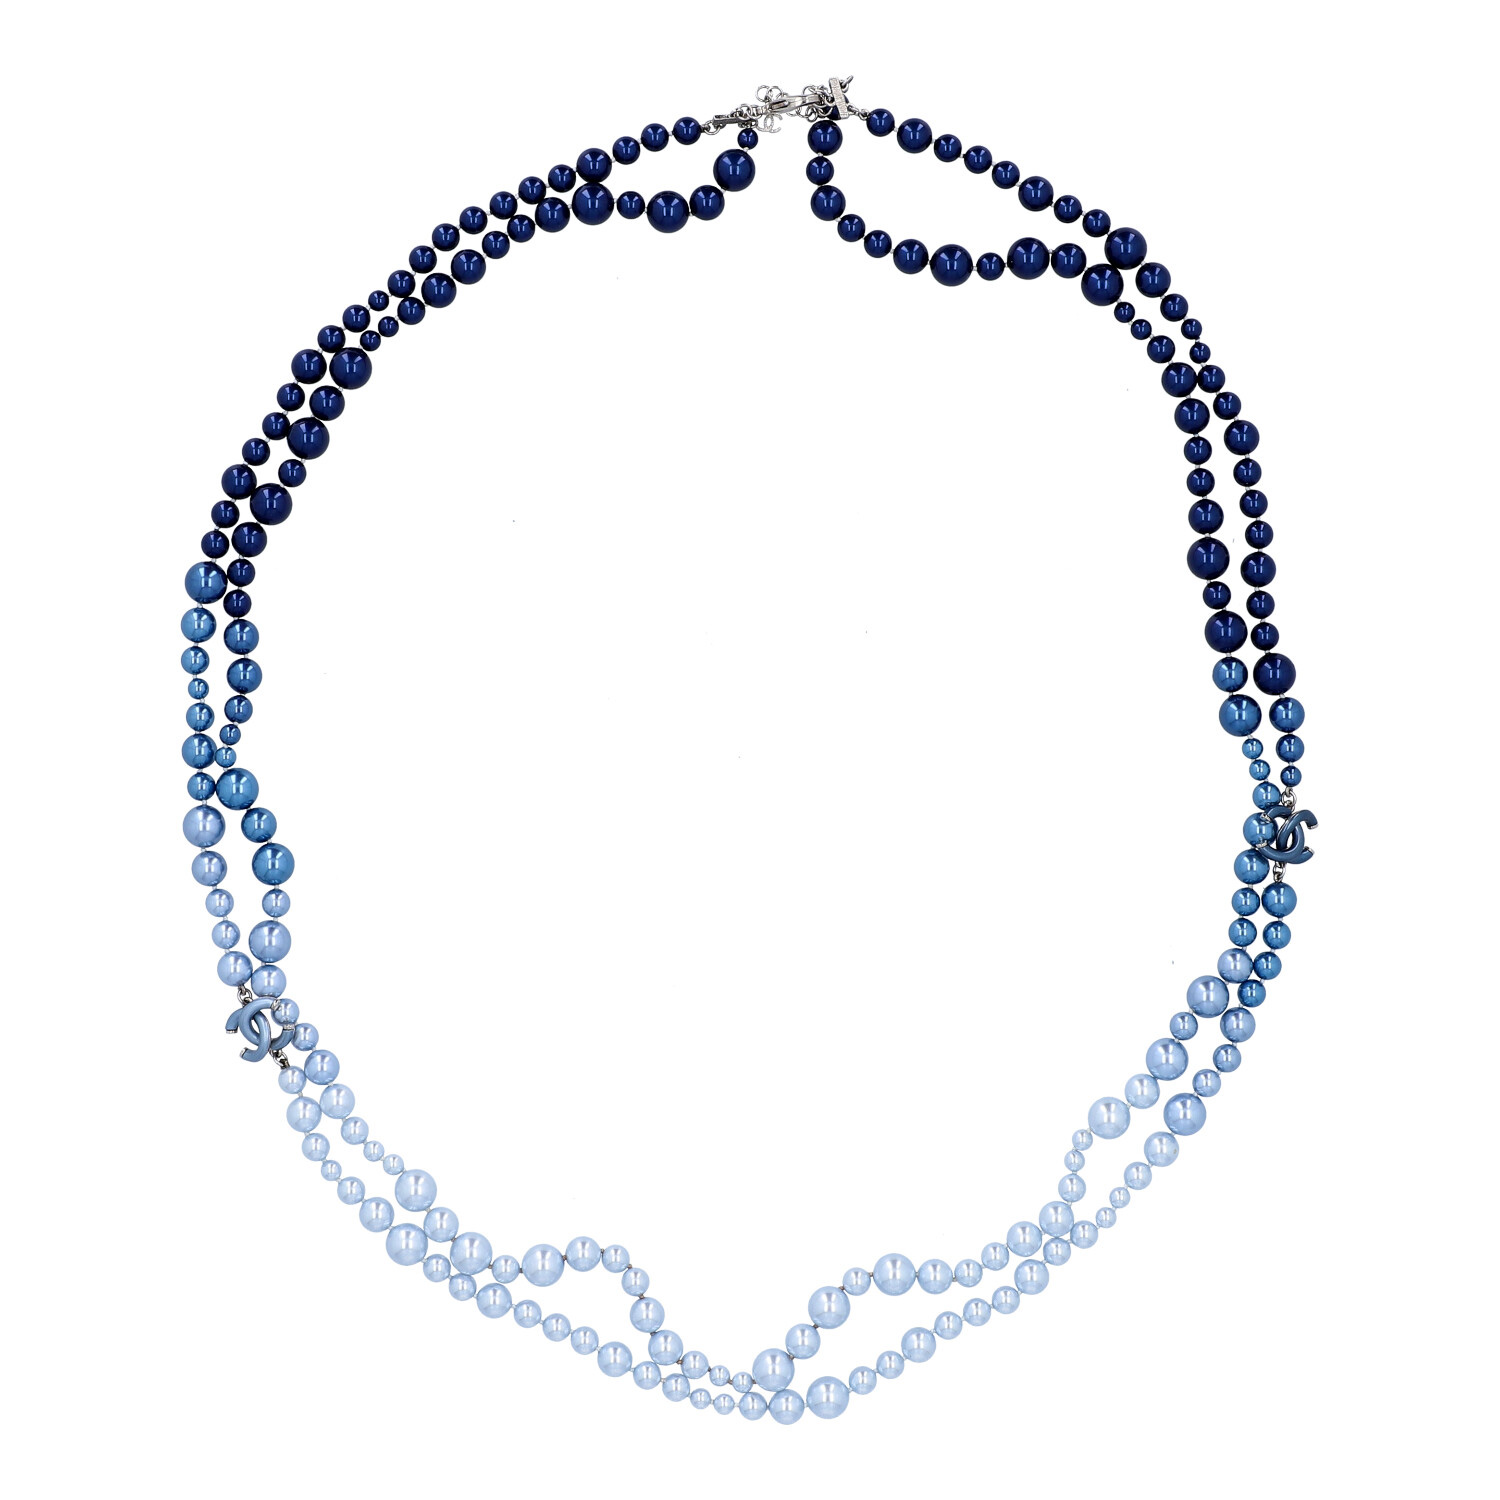 EPPLI | CHANEL Costume Jewelry Necklace, Coll. 2018. | purchase online